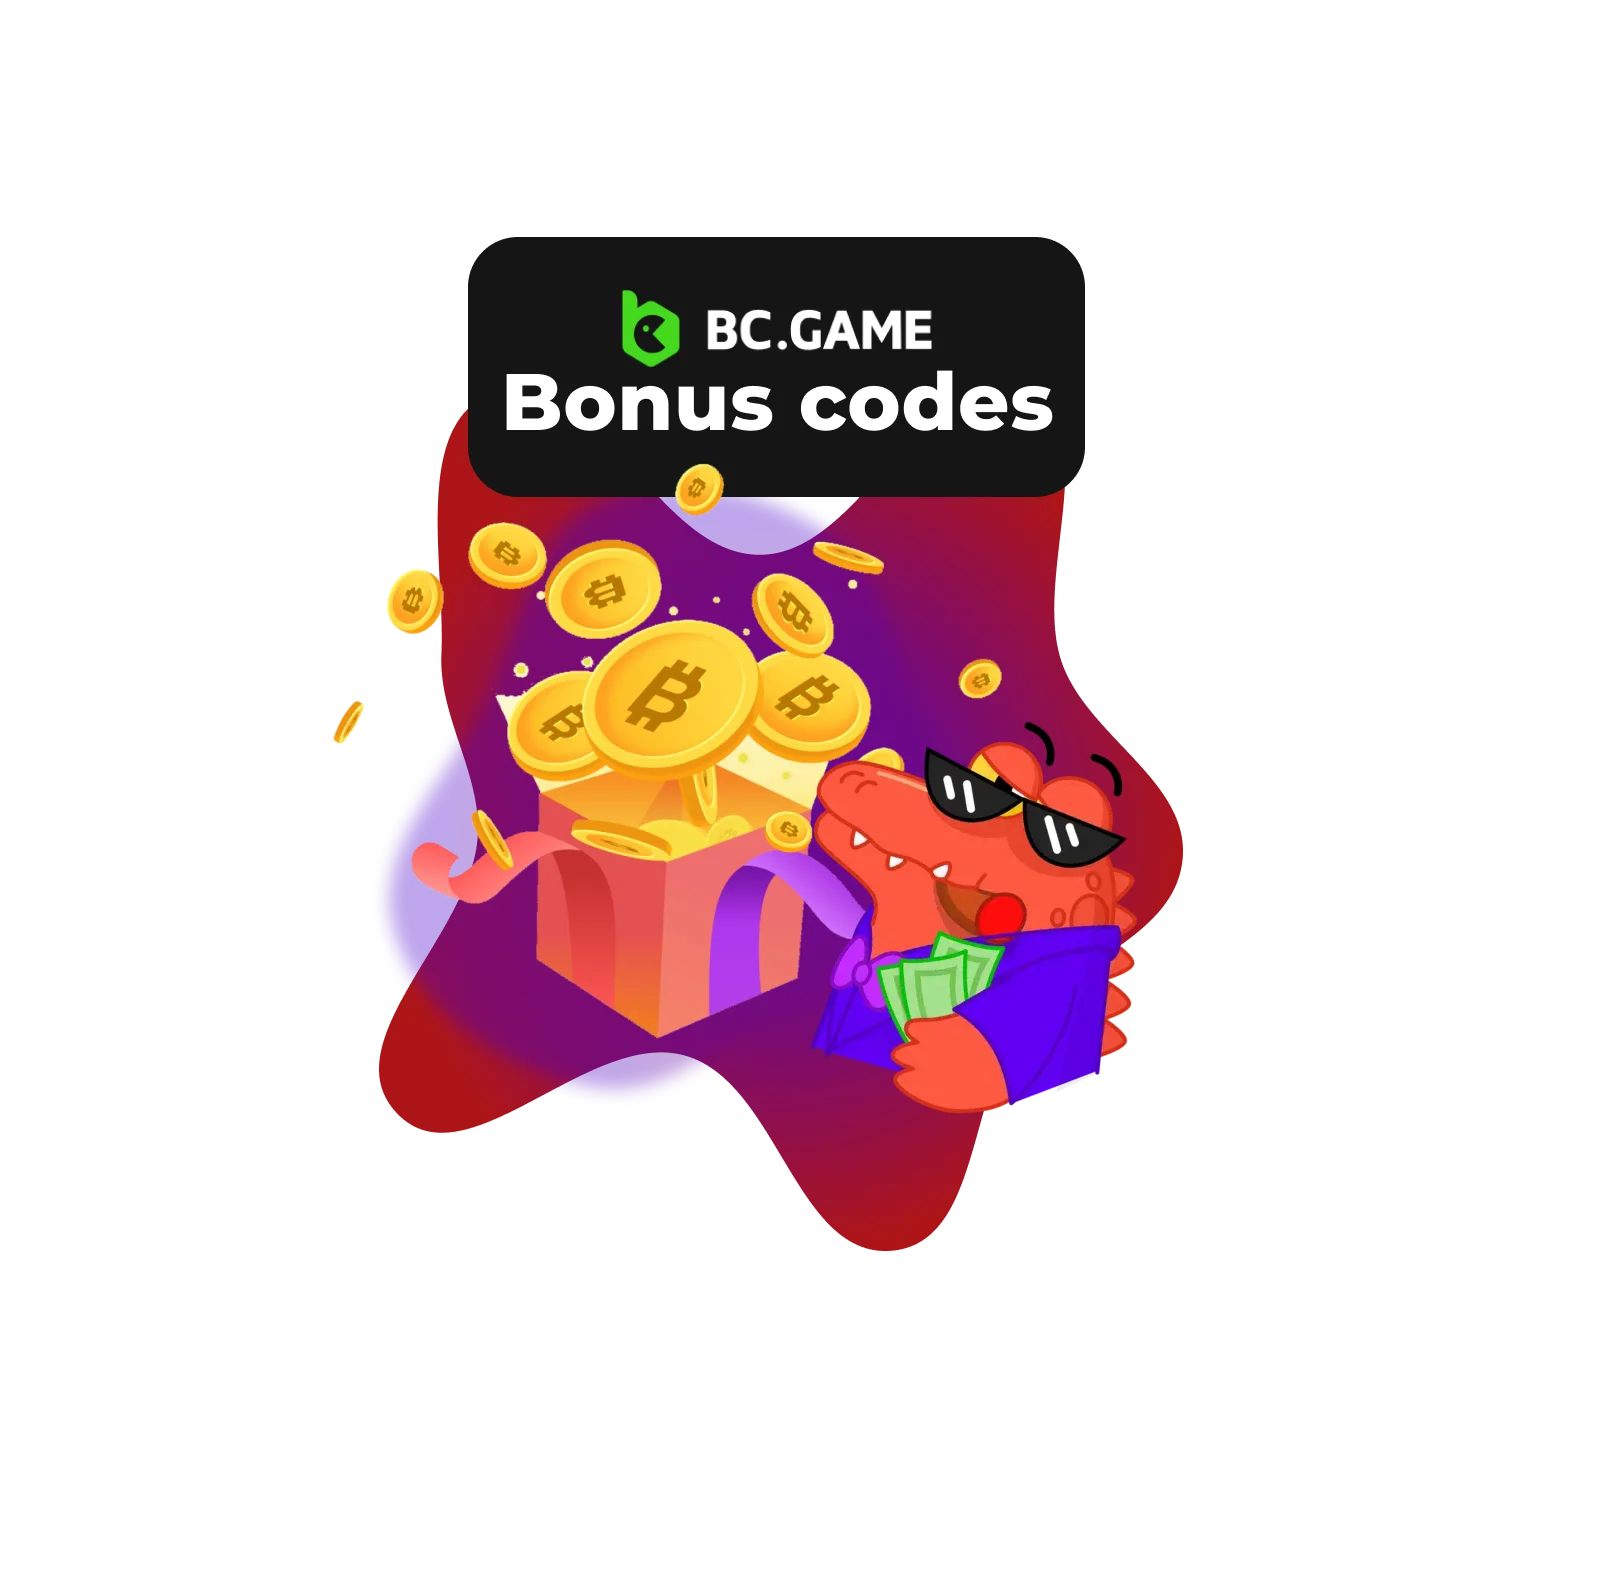 BC.Game bonus code banner for Iran, advertising special bonus codes with attractive graphics and tempting offers for new and existing players in Iran.